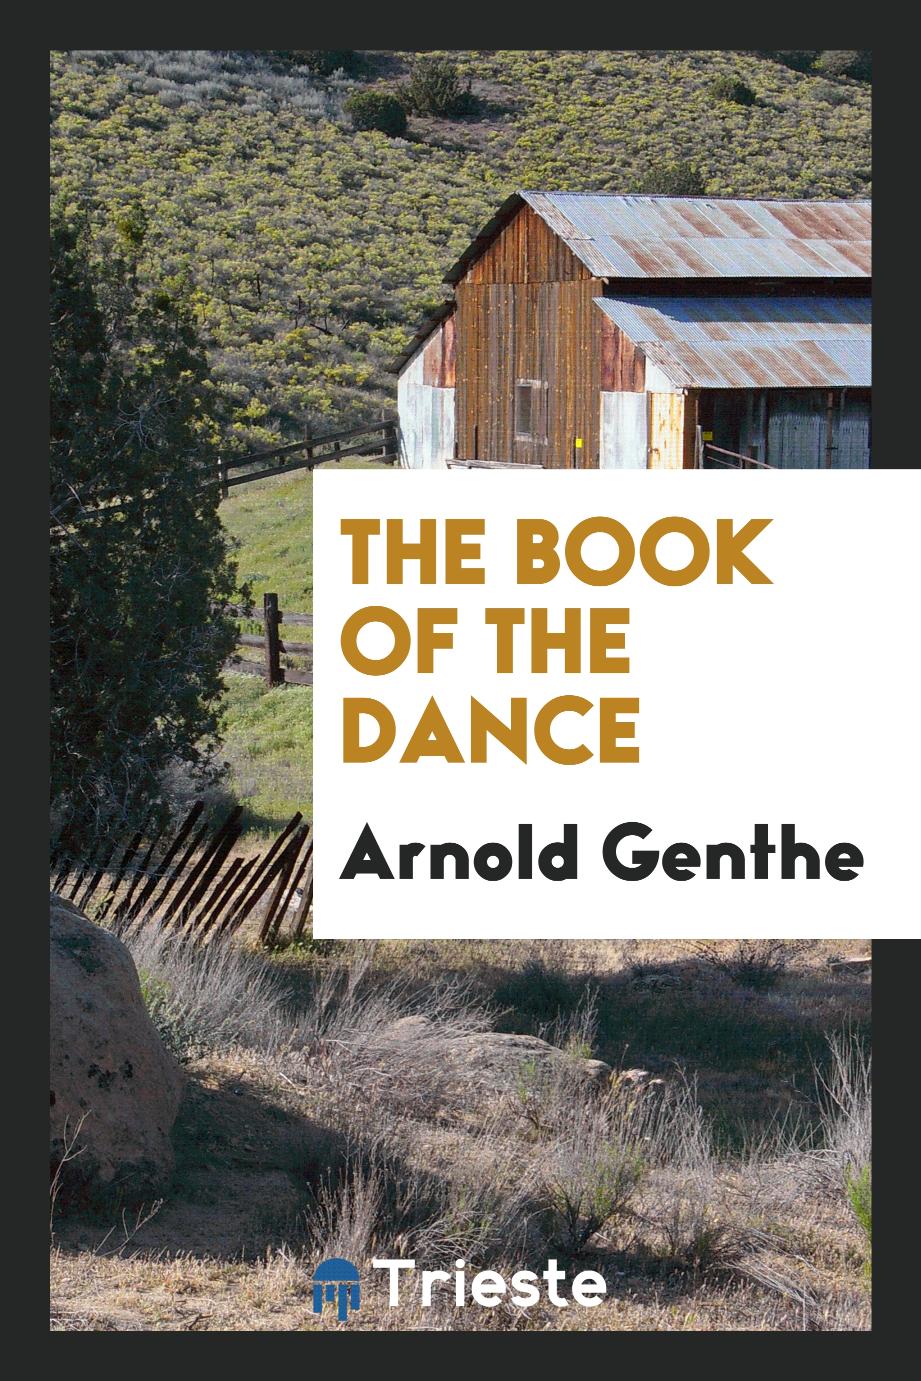 The book of the dance